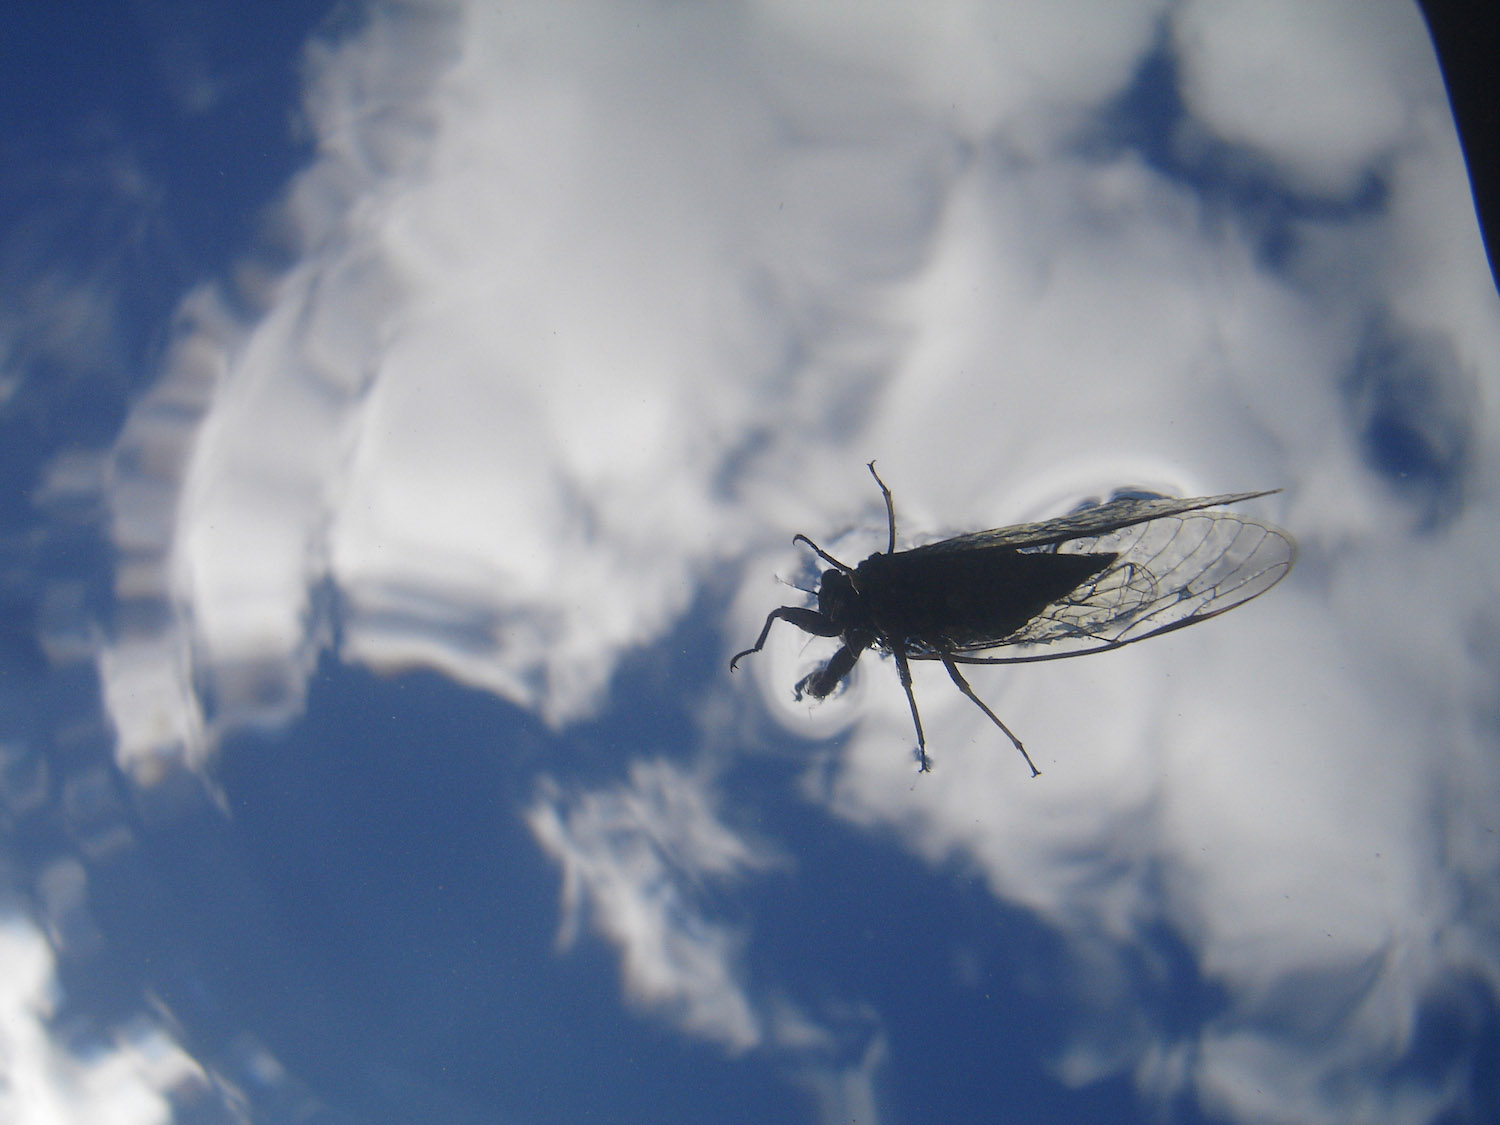 a lesser Bronze Cicada on clear water photographed from below, with blue sky and clouds above